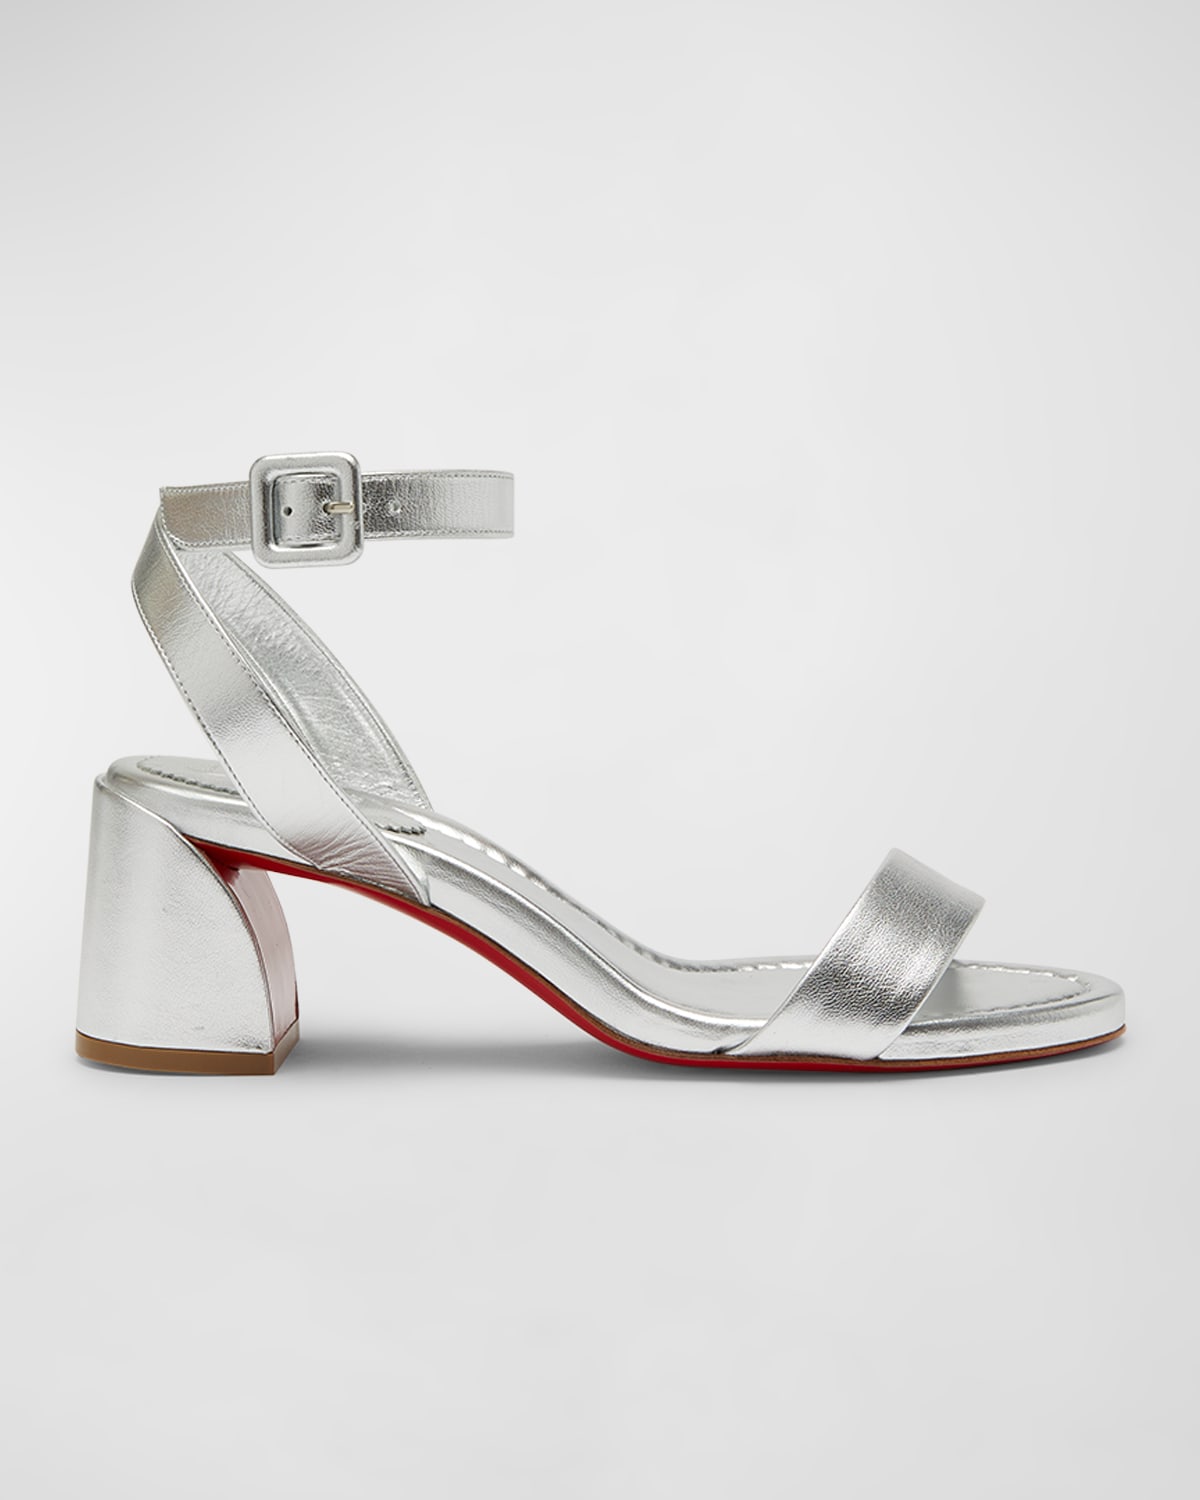 Christian Louboutin Clear Spike Red Sole Ankle-Strap Pumps